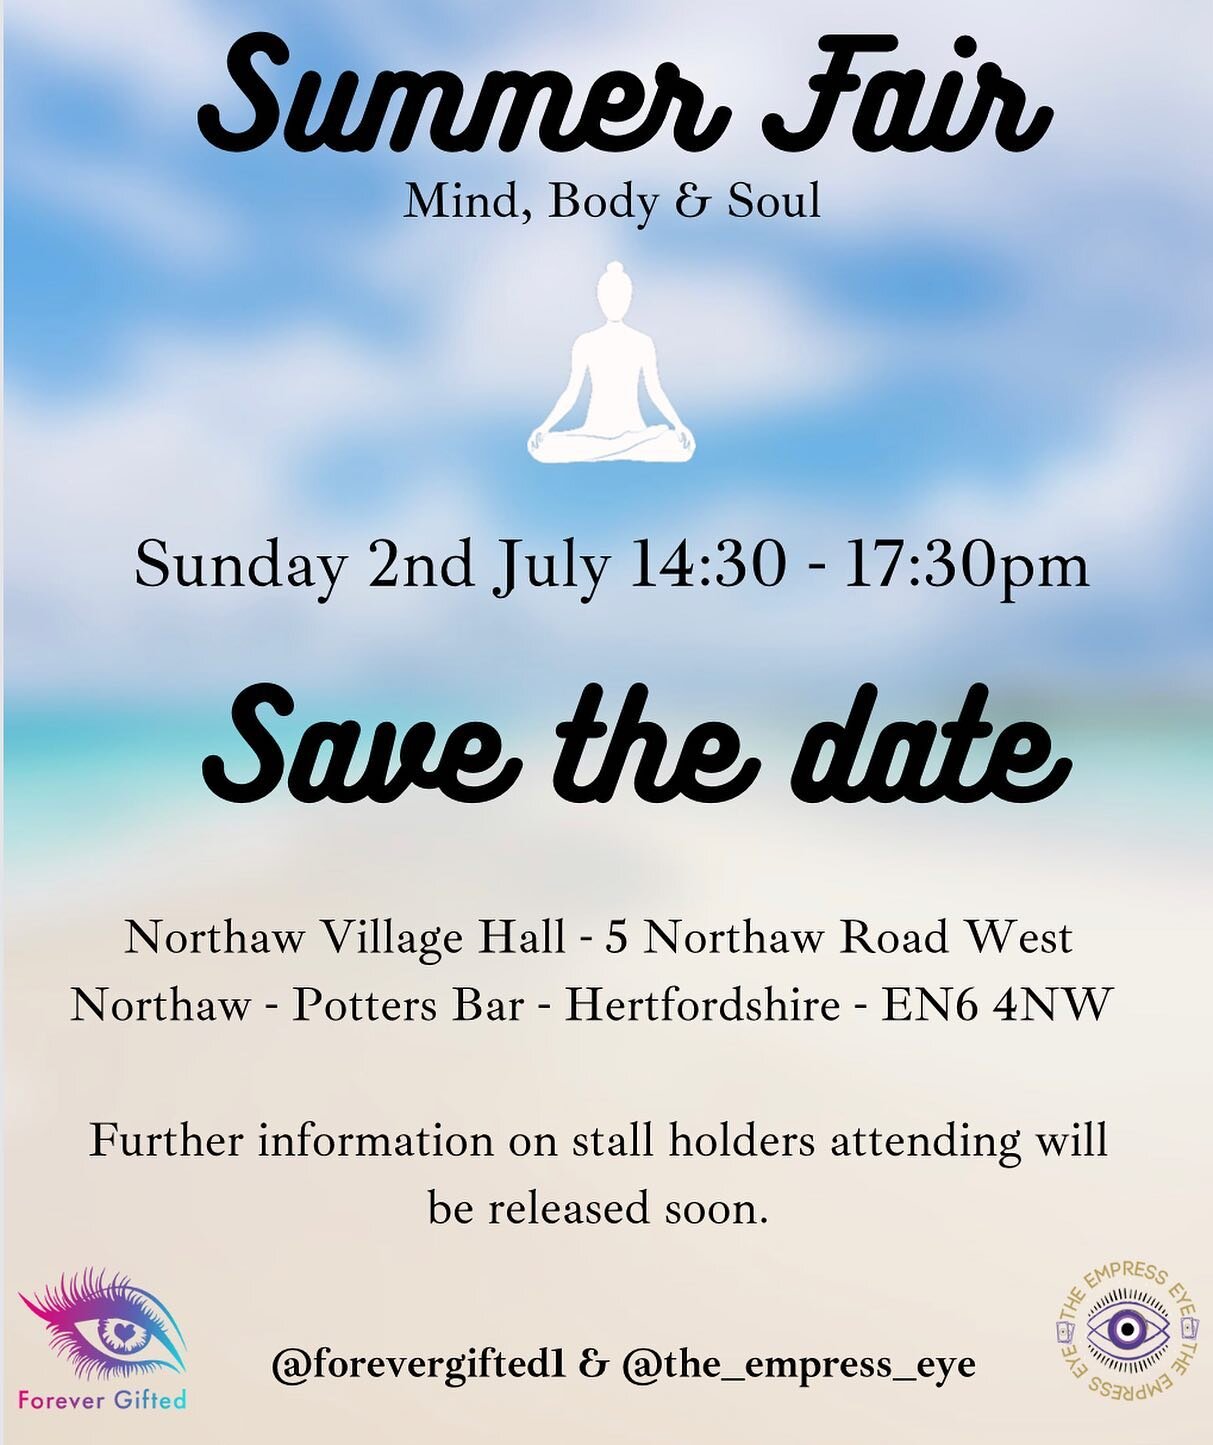 Summer  Fair - Mind, Body &amp; Soul

Save the date

Sunday 2nd July 
2:30 - 5:30pm 

Northaw Village Hall
5 Northaw Road West
Northaw
Potters Bar
Hertfordshire
EN6 4NW

myself &amp; @the_empress_eye are super excited to be hosting our next event tog